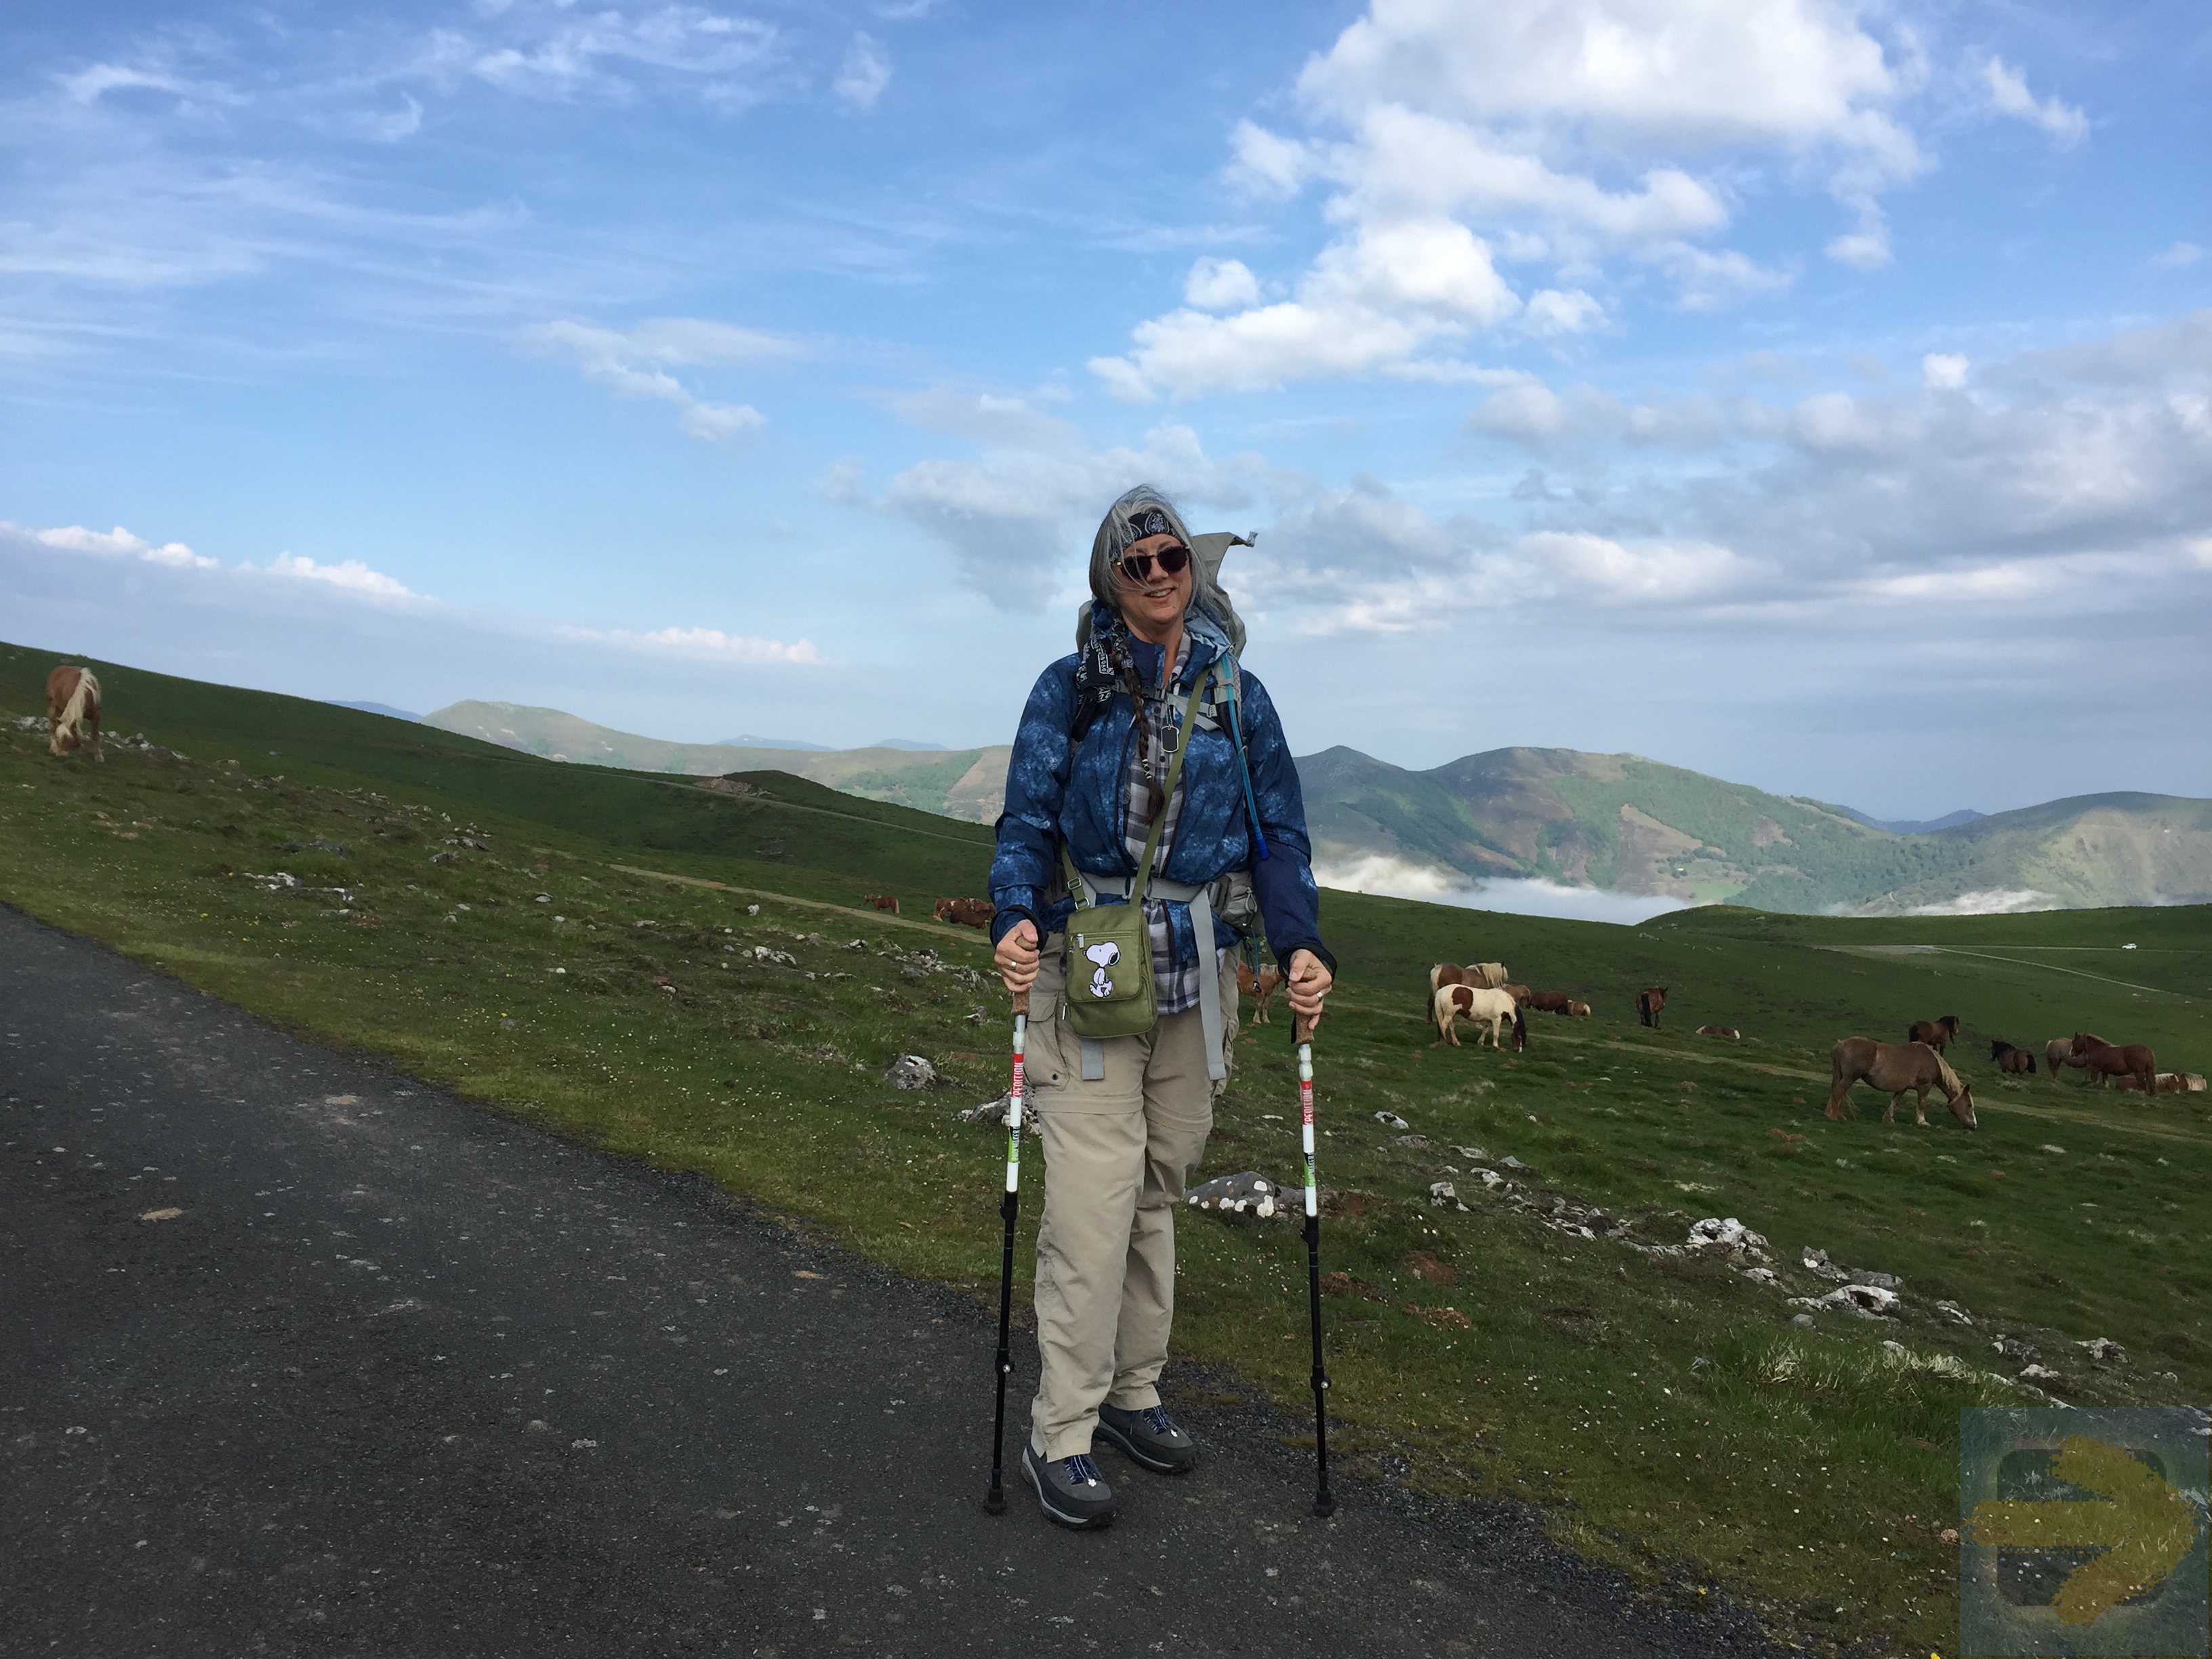 Above the clouds ~ trekking through the Pyrenees May 2016